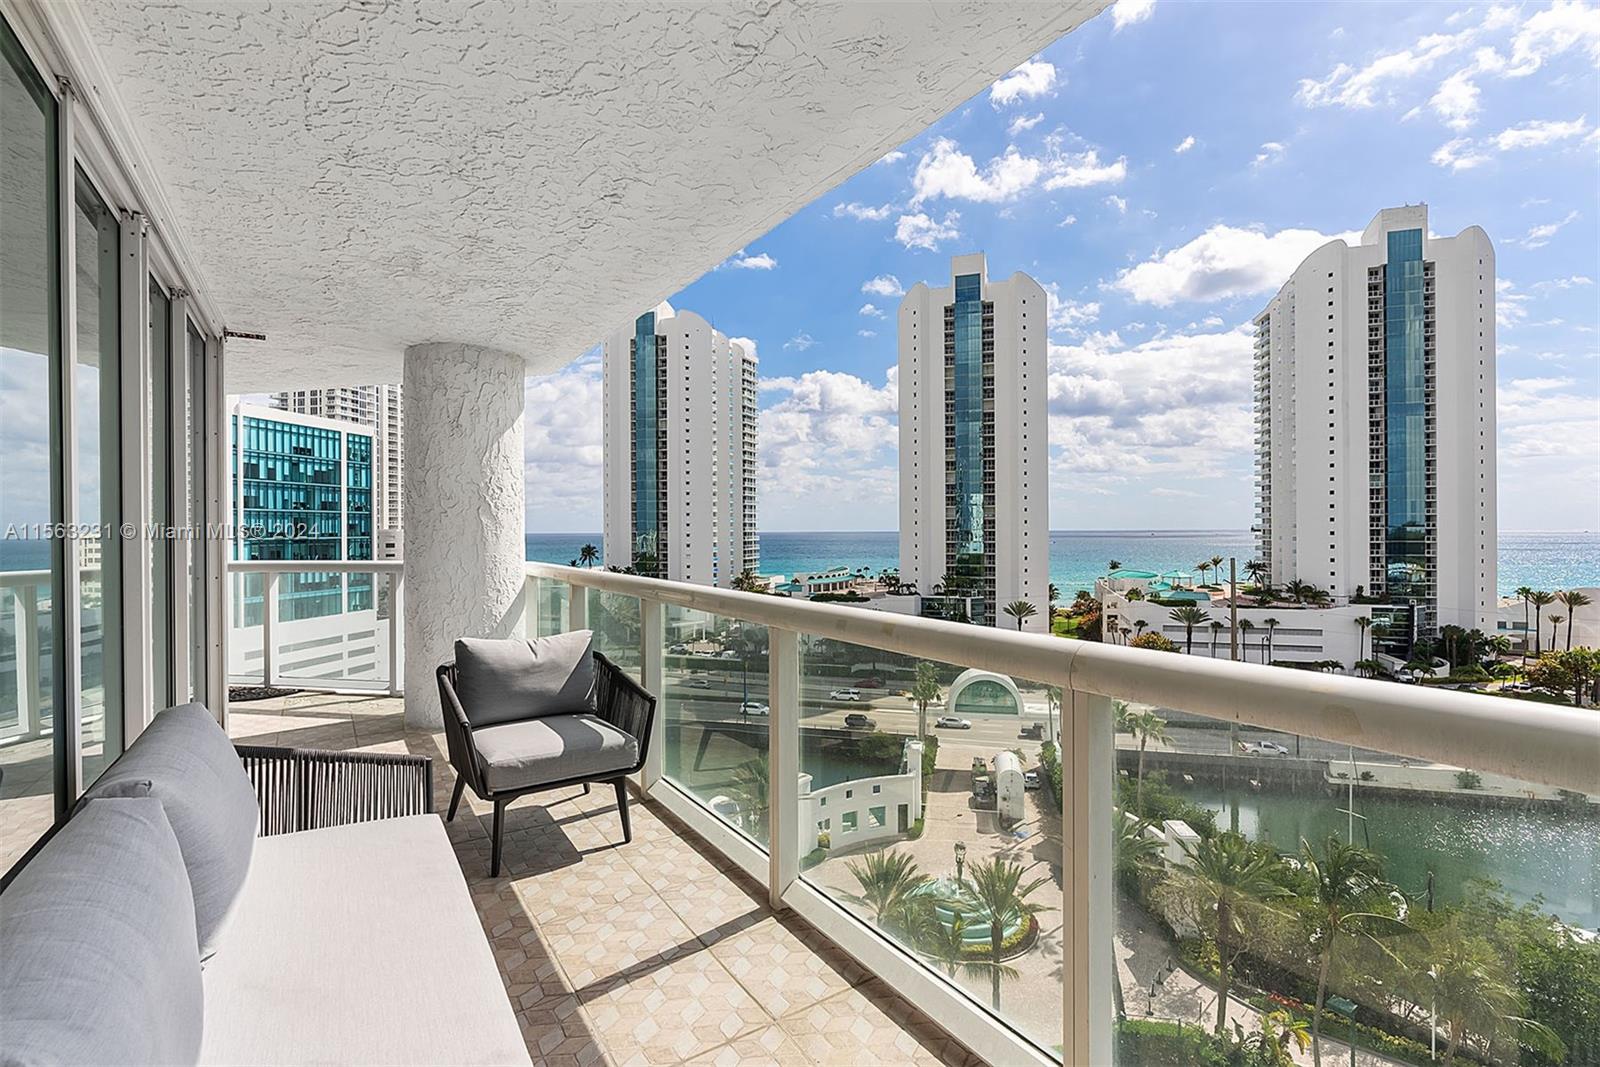 Indulge in luxury living at Oceania in Sunny Isles Beach. This fully remodeled gem features 2 beds, 2 baths, and a den. Enjoy panoramic ocean and intercoastal views from every room and the large balcony. Experience 5-star amenities including multiple pools, tennis and squash courts, private beach with full service, club, spa, MARINA, Pilates, and yoga. Relish ocean-view dining at two restaurants, unwind at the bar, and get pampered at the beauty salon. Spend the day tanning, swimming, or walking on the white sand beaches of Sunny Isles. Head over to the Shops of Bal Harbor or Aventura Mall and visit the many high-end stores and restaurants. Oceania is the essence of S. Florida luxury living with resort-style amenities, picturesque beaches, shopping, and restaurants all at your fingertips.